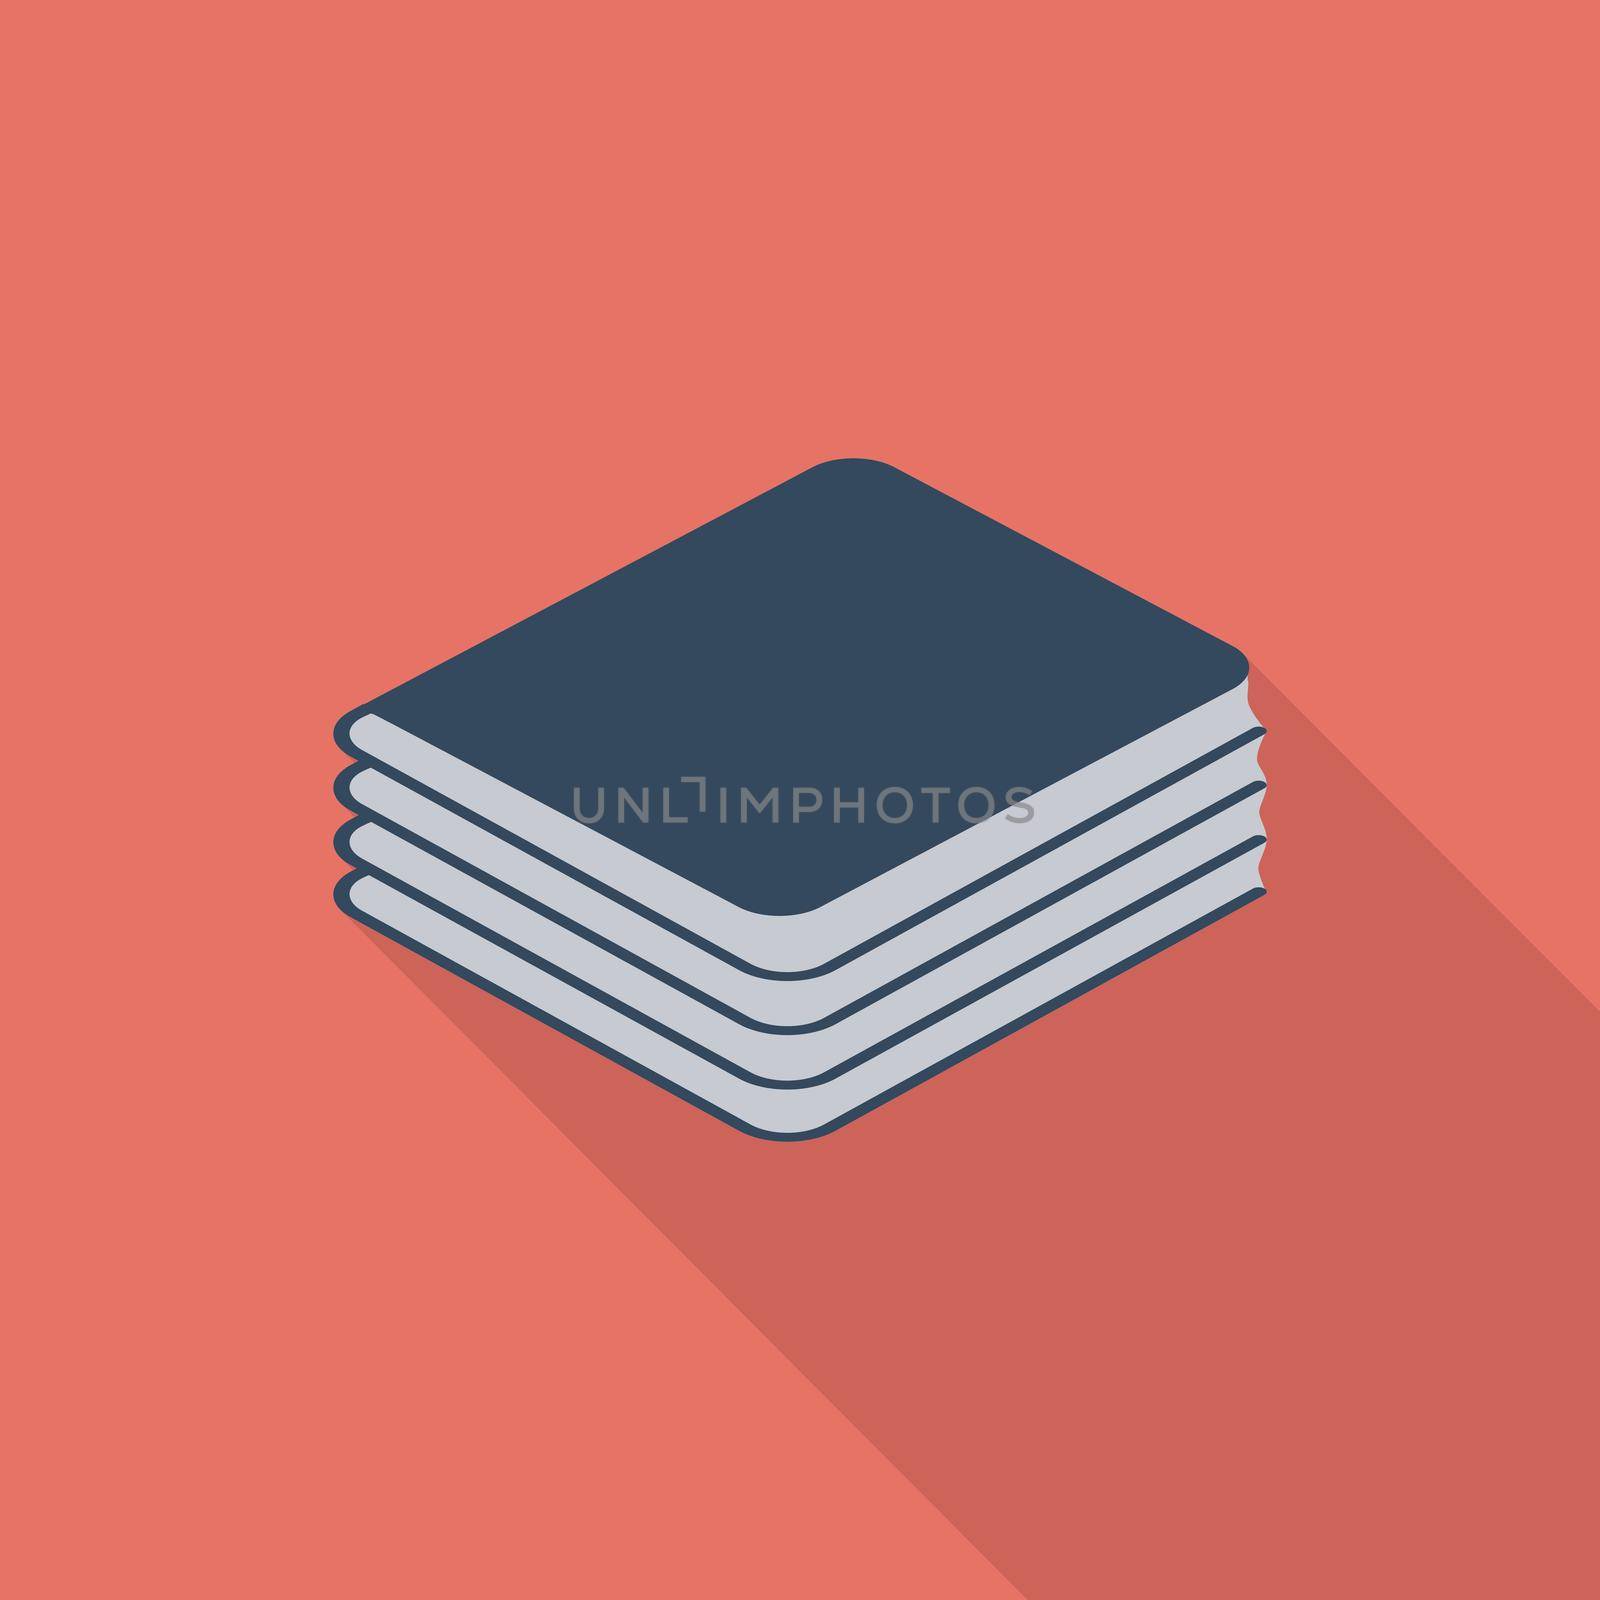 Book icon. Flat related icon with long shadow for web and mobile applications. It can be used as - logo, pictogram, icon, infographic element. Illustration.